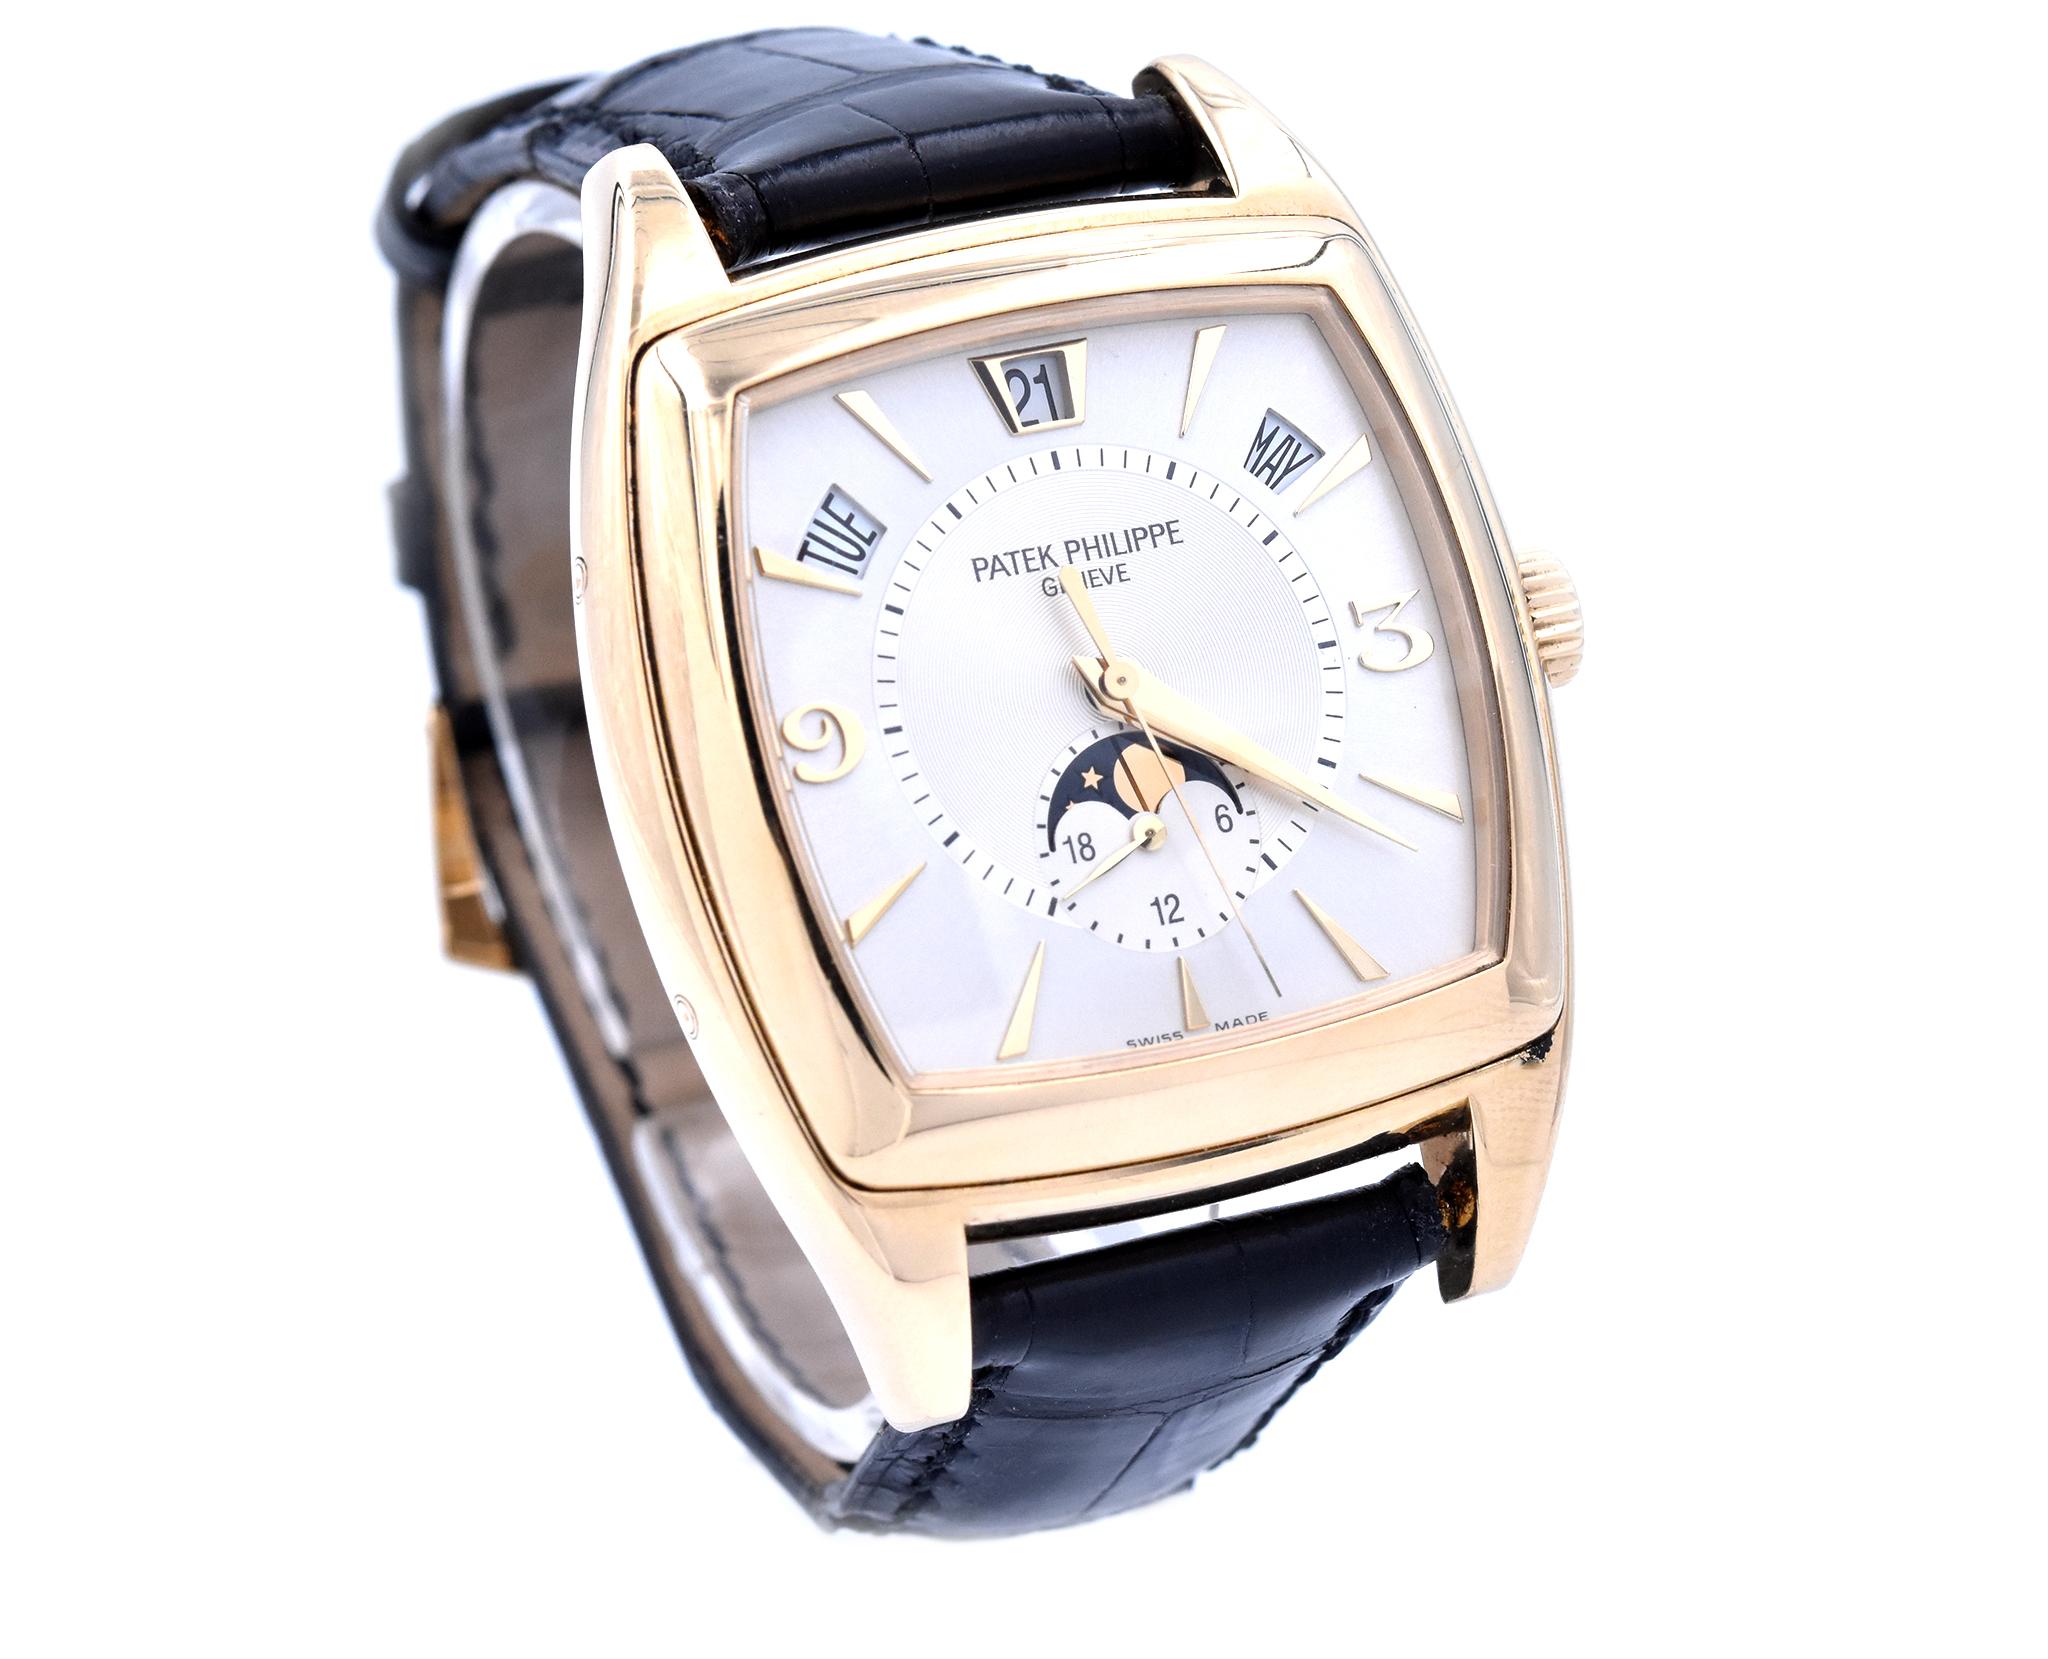 Movement: automatic
Function: hours, minutes, date, moonphase
Case: 51mm yellow gold case, sapphire protective crystal, push/pull crown
Dial: cream dial with yellow gold hands and stick hour markers
Band: black crocodile strap with factory 18K